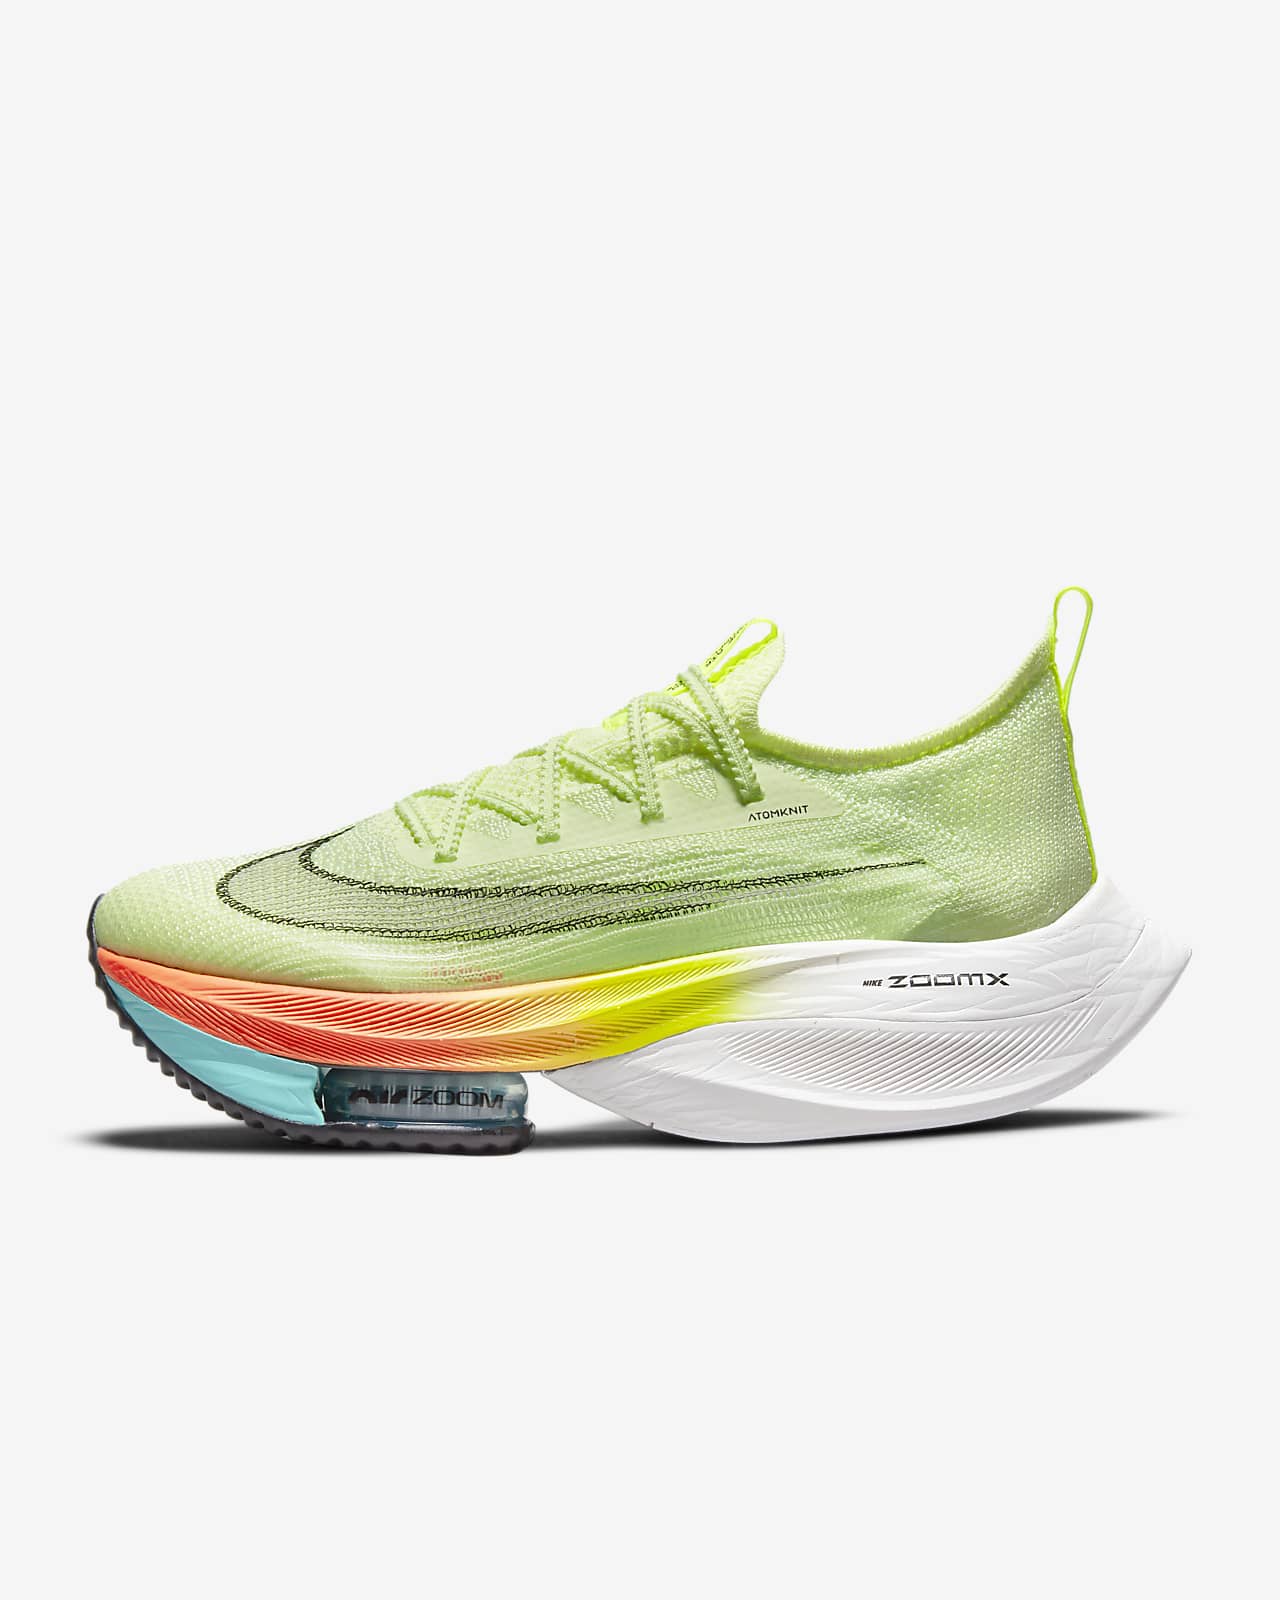 Nike Air Zoom Alphafly NEXT% Flyknit Women's Road Racing Shoes شفاط هواء